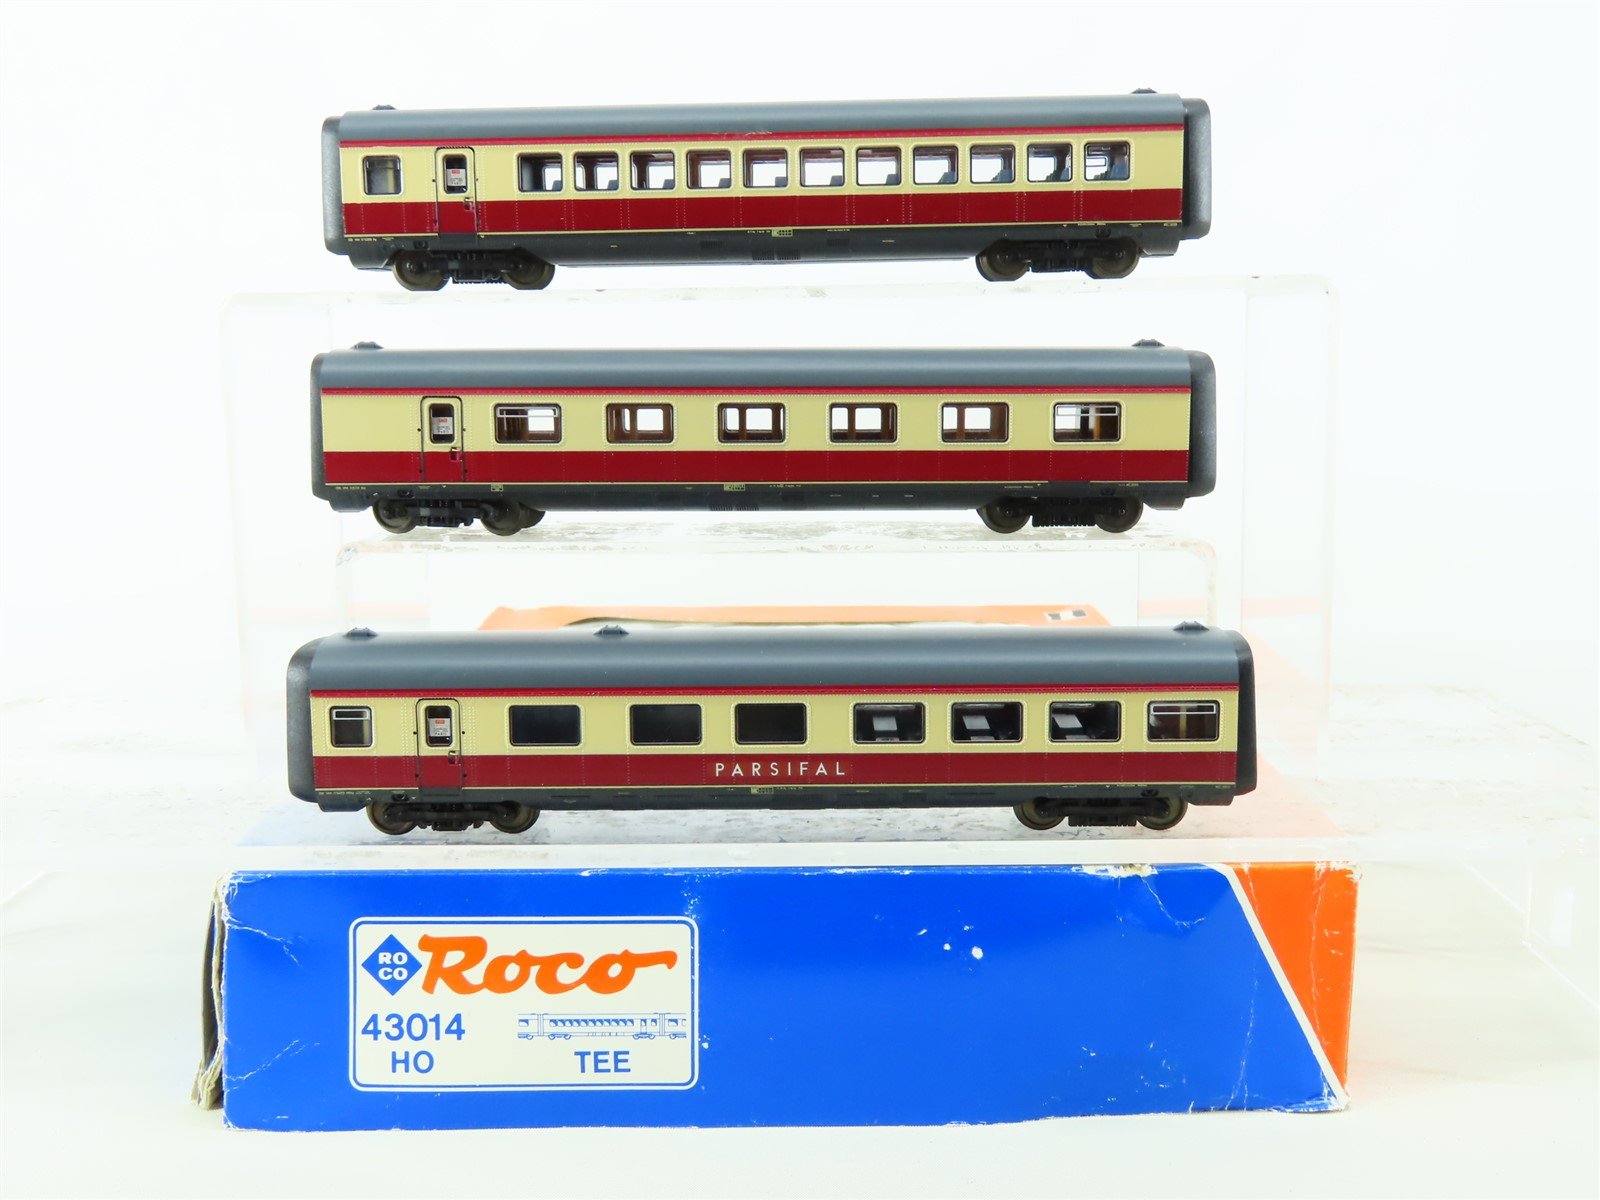 HO Scale Roco 43014 TEE Trans-Europe Express Passenger 3-Car Add-On Set